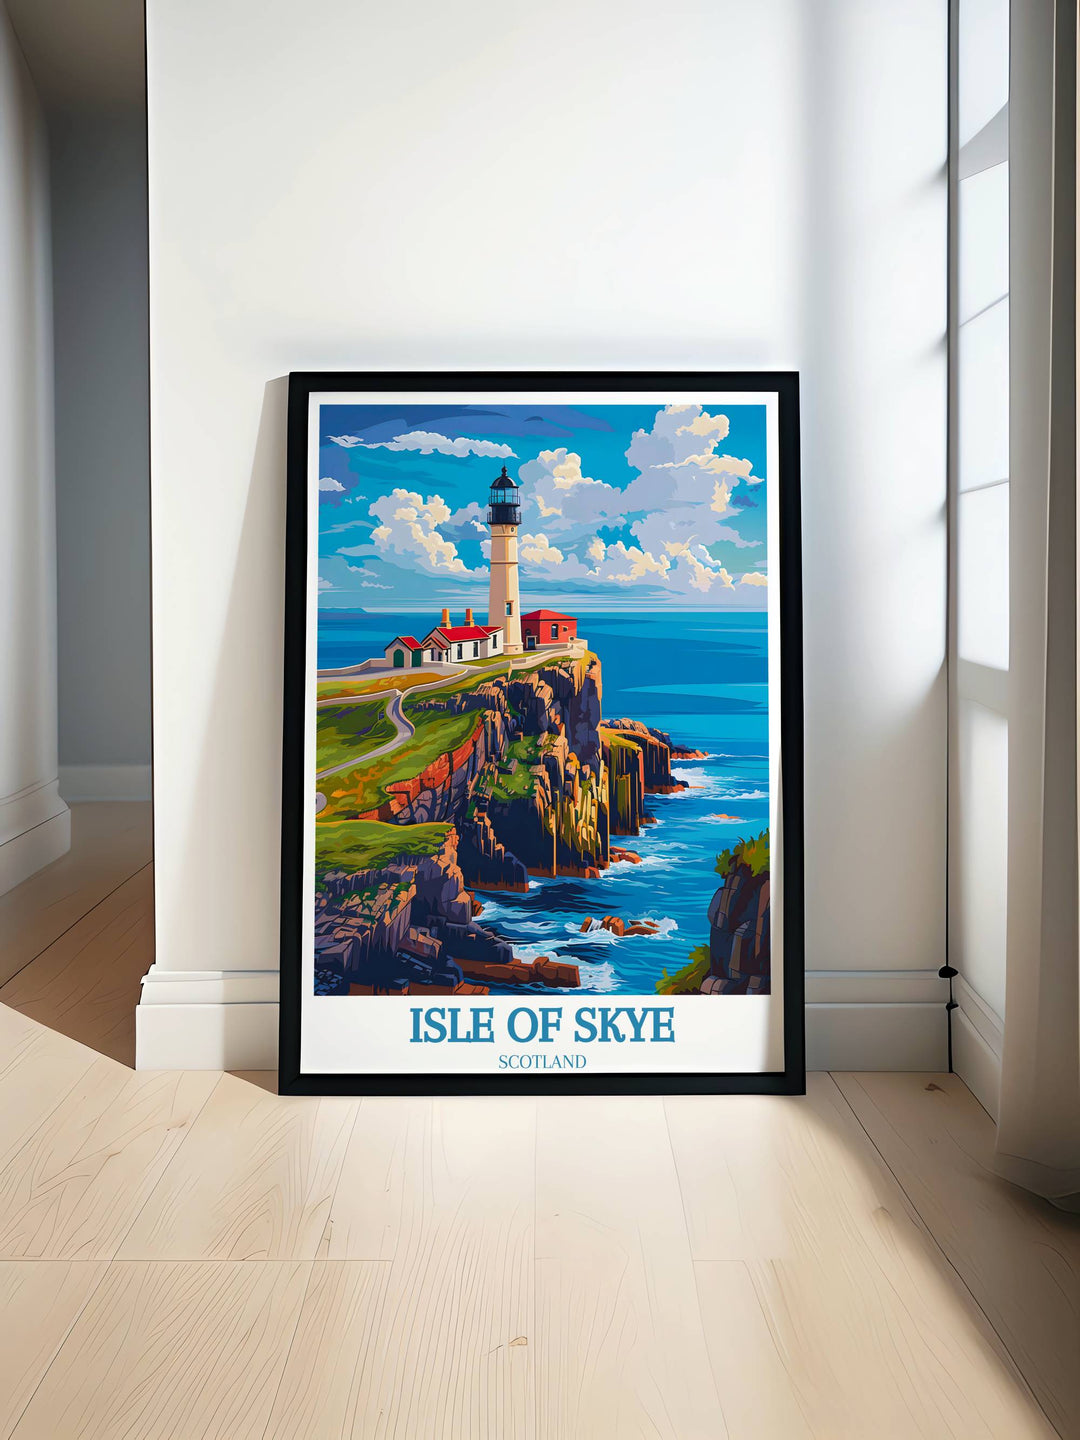 A vivid print of Neist Point Lighthouse on the Isle of Skye showcasing the rugged cliffs and surging waves of Scotland, perfect for wall decor.